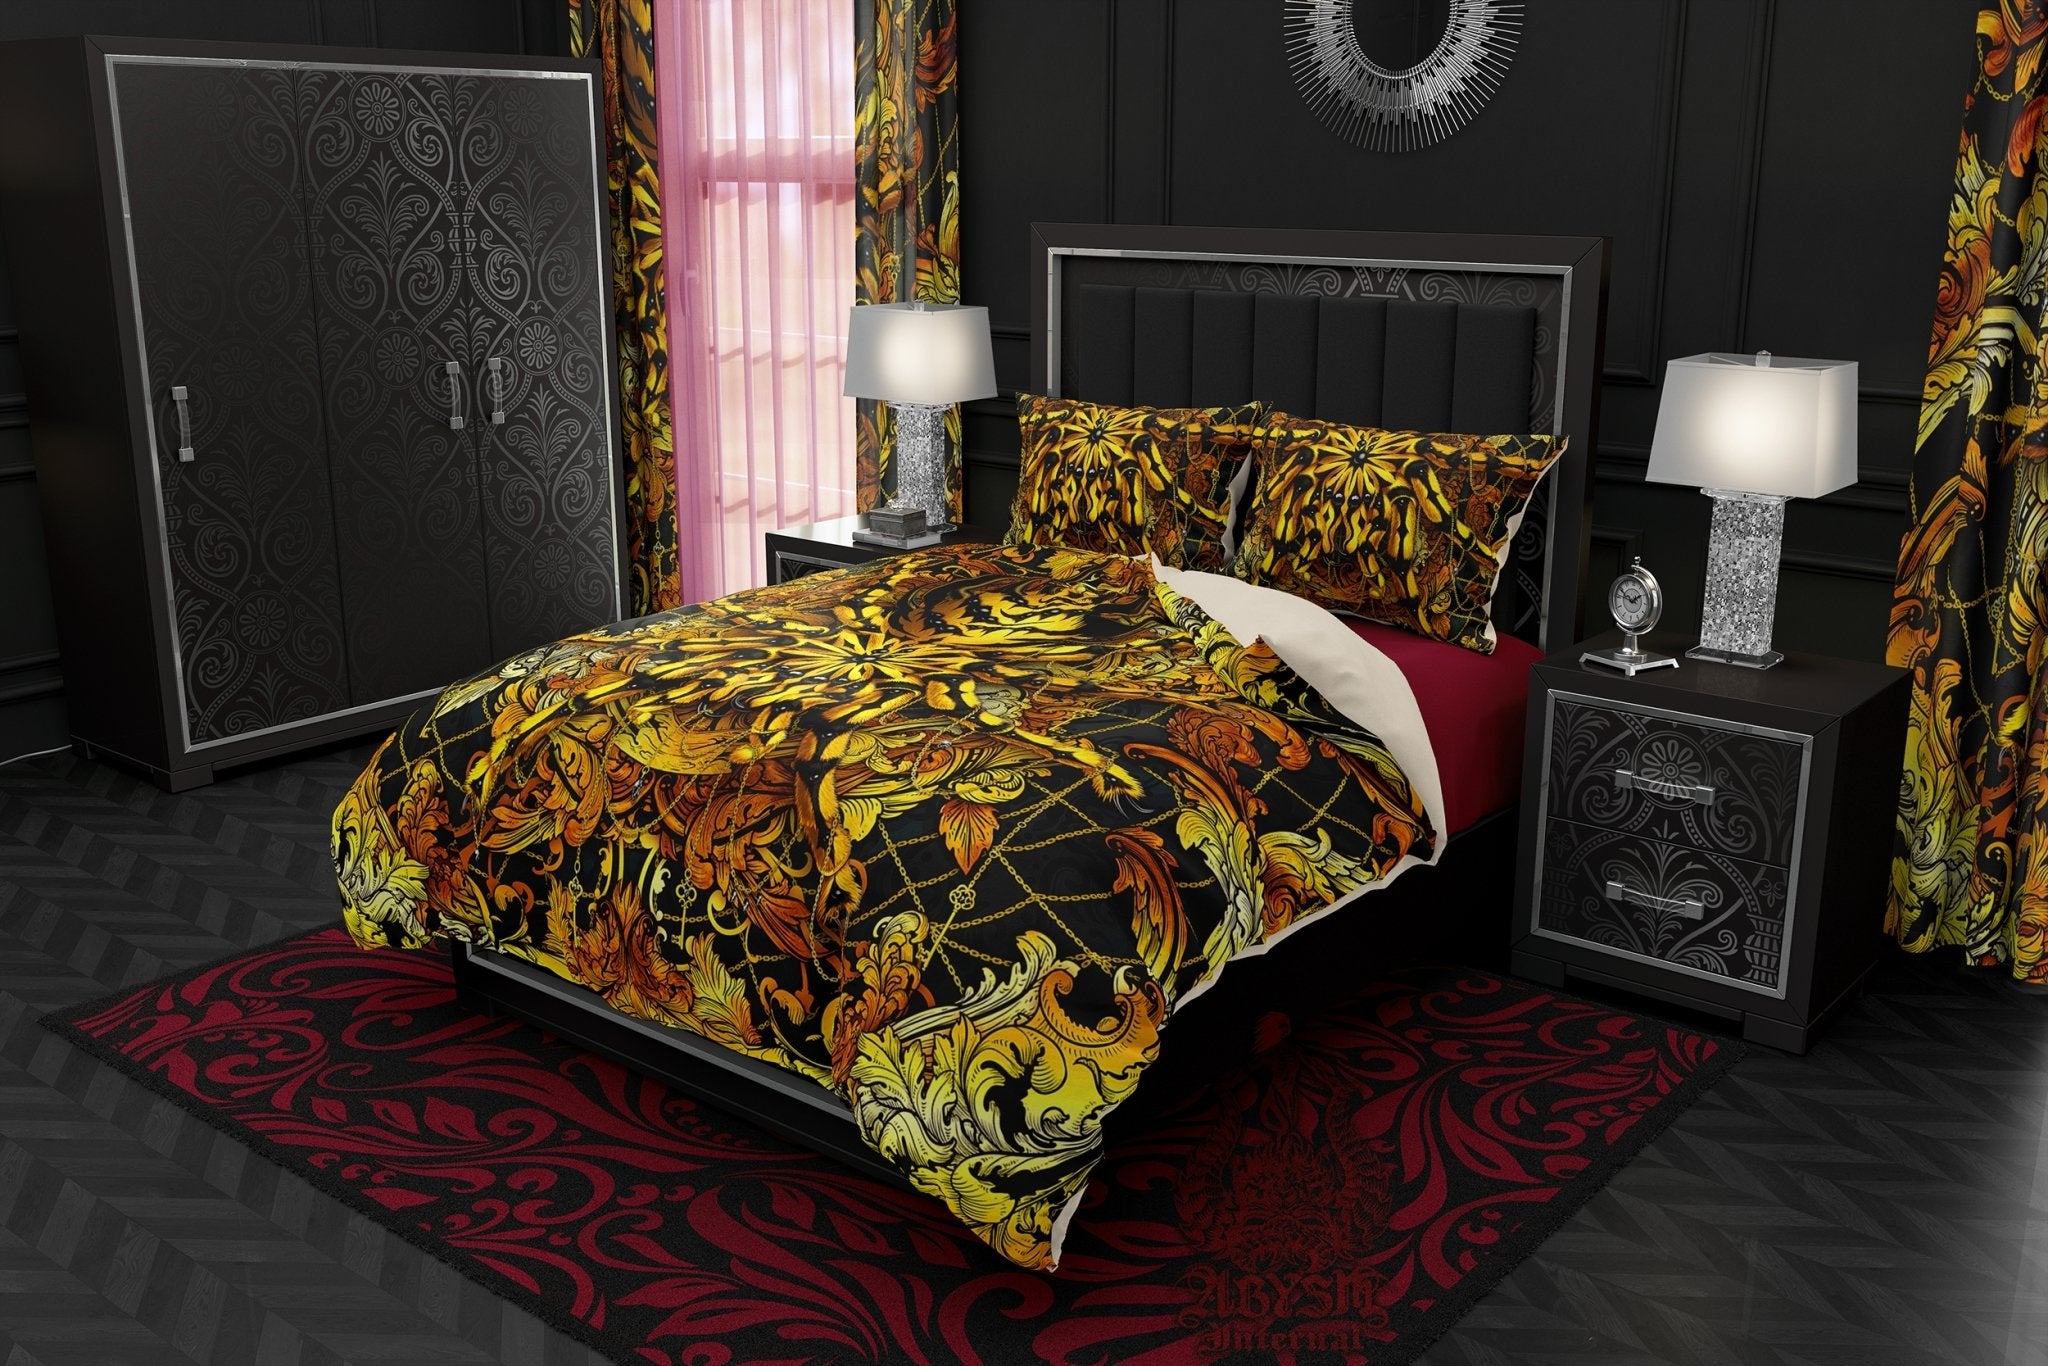 Spider Bedding Set, Comforter and Duvet, Bed Cover and Bedroom Decor, King, Queen and Twin Size - Tarantula Gold Black - Abysm Internal